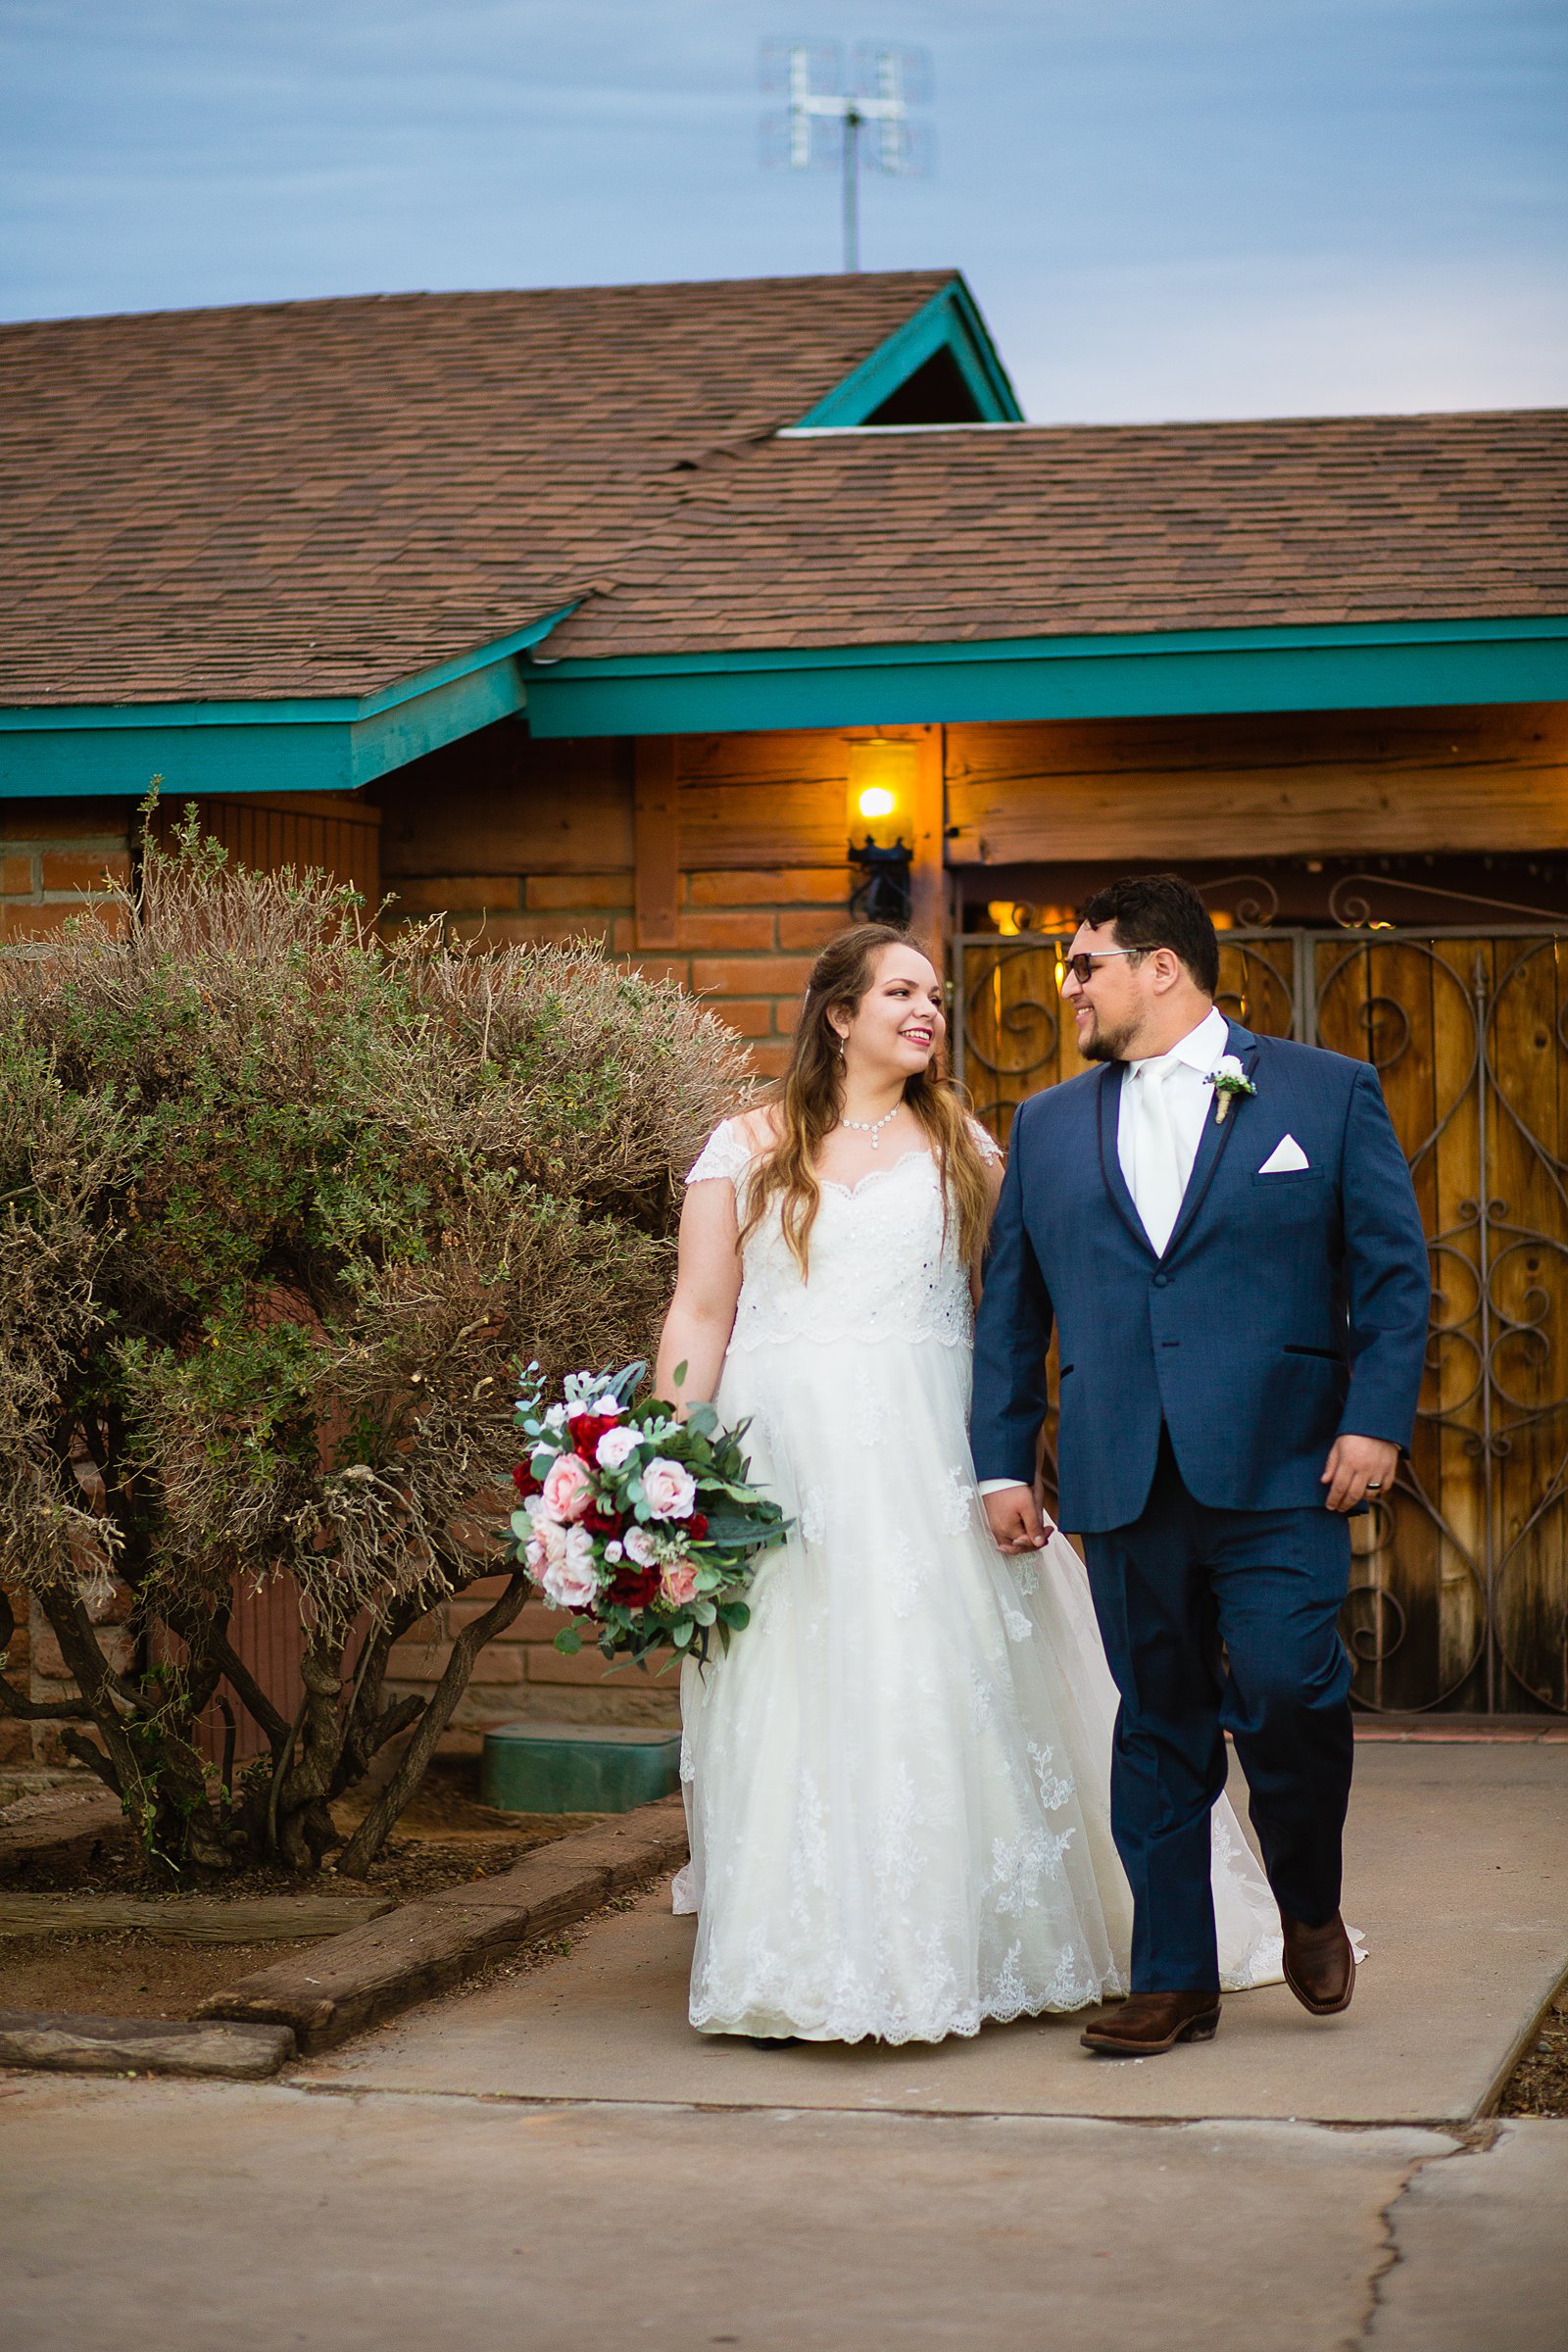 Bride and Groom walking together during their Backyard wedding by Casa Grande wedding photographer PMA Photography.